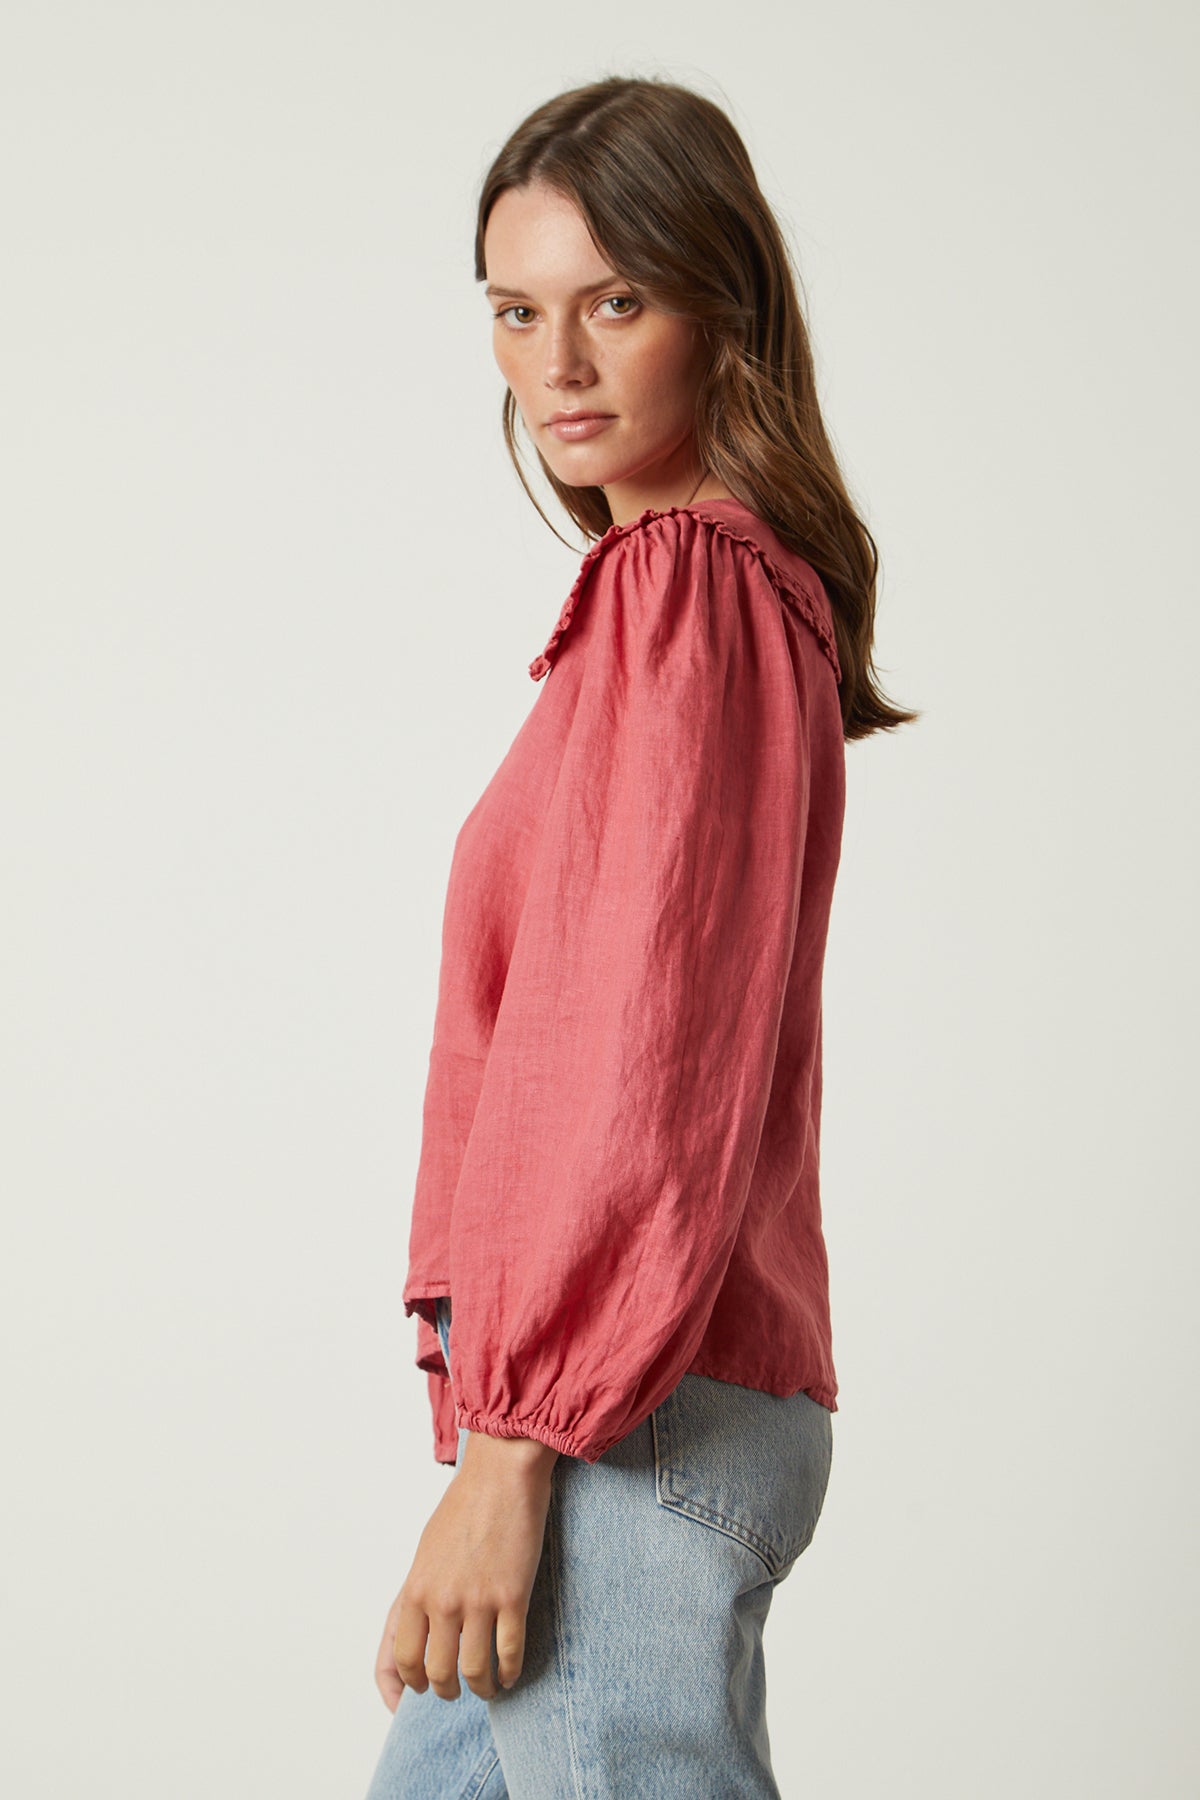 Sofia linen top in punch with light blue denim side-26079070519489